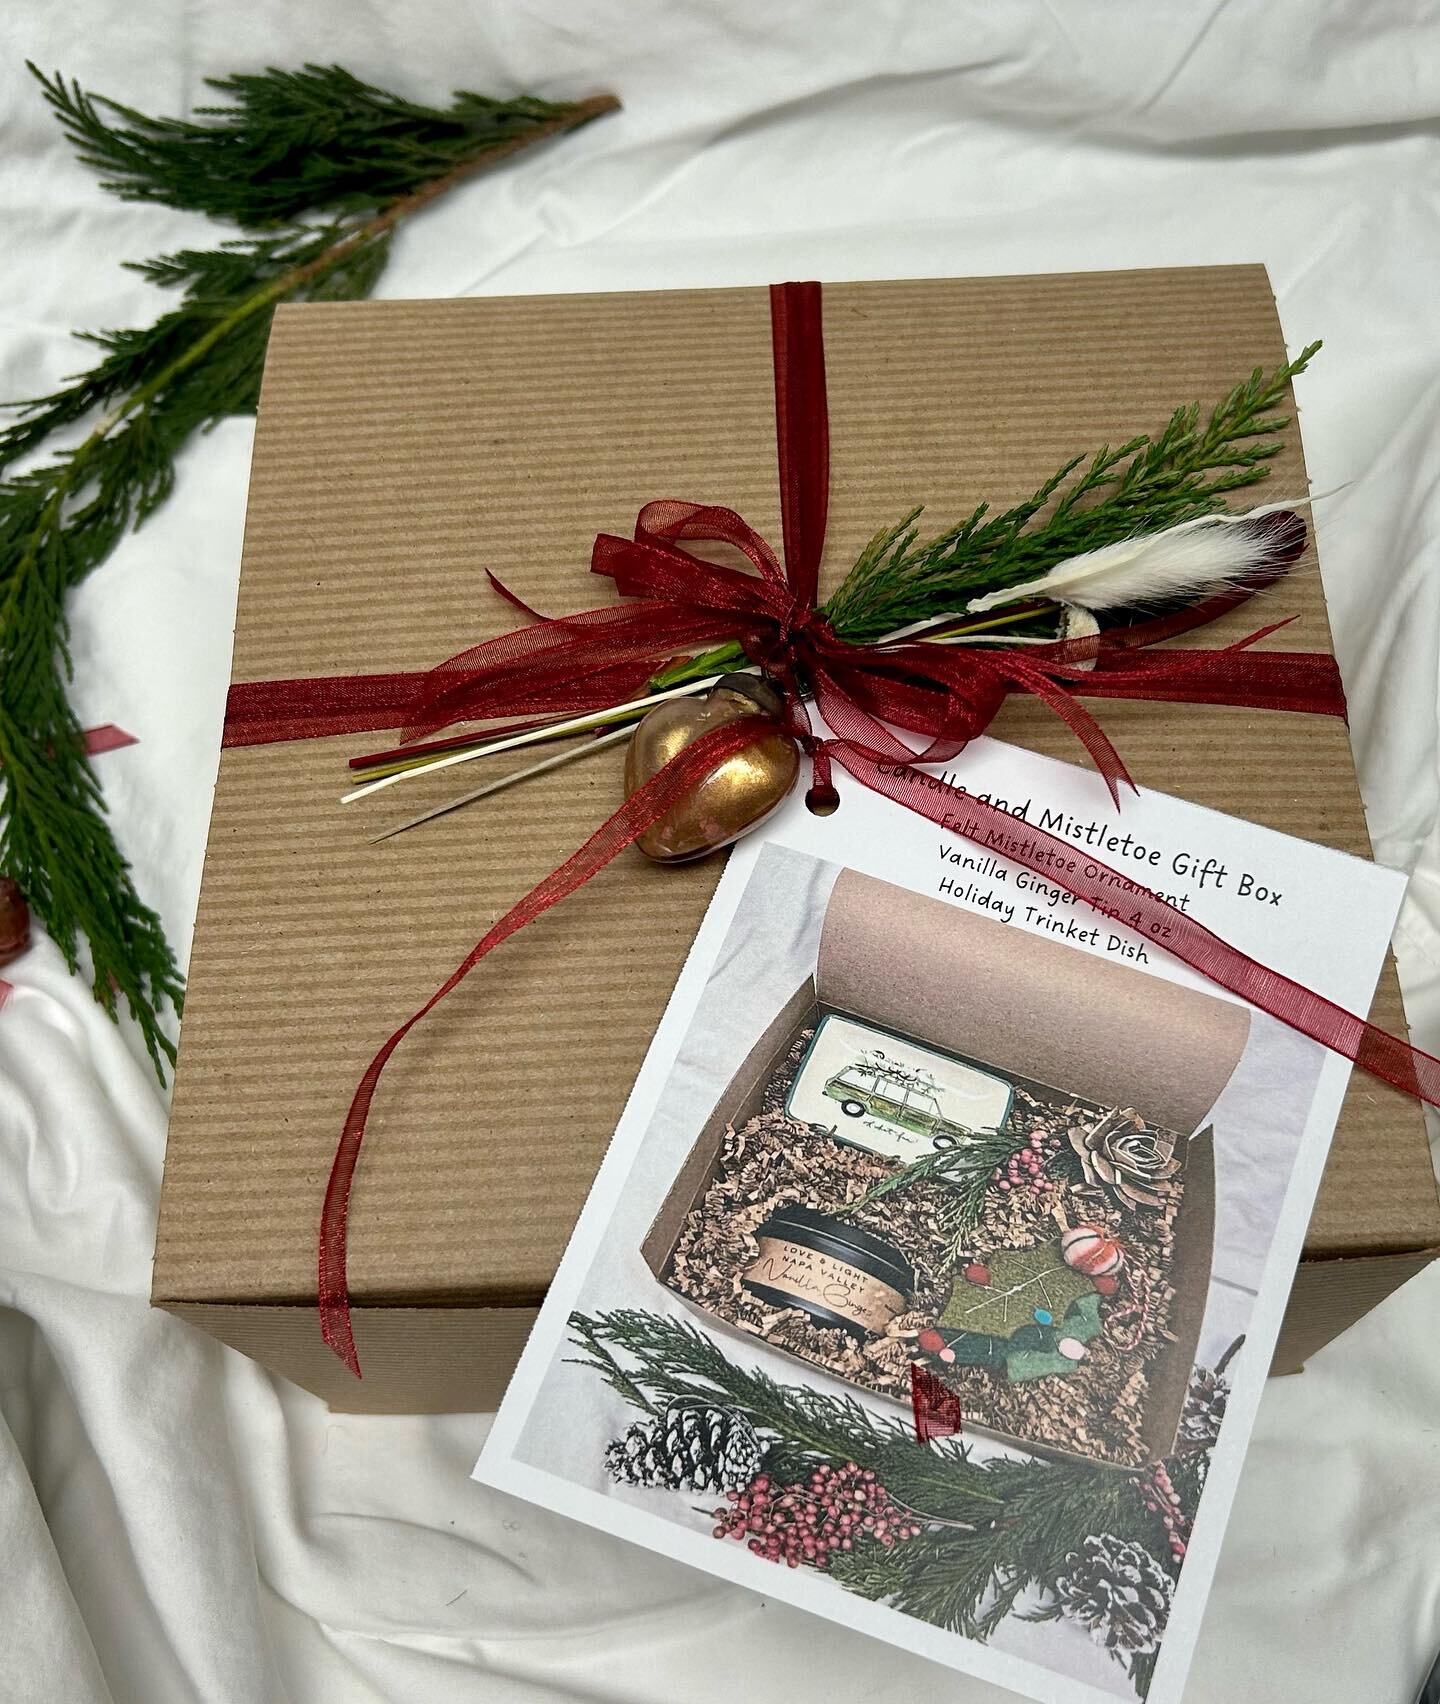 Holiday gift boxes are available!